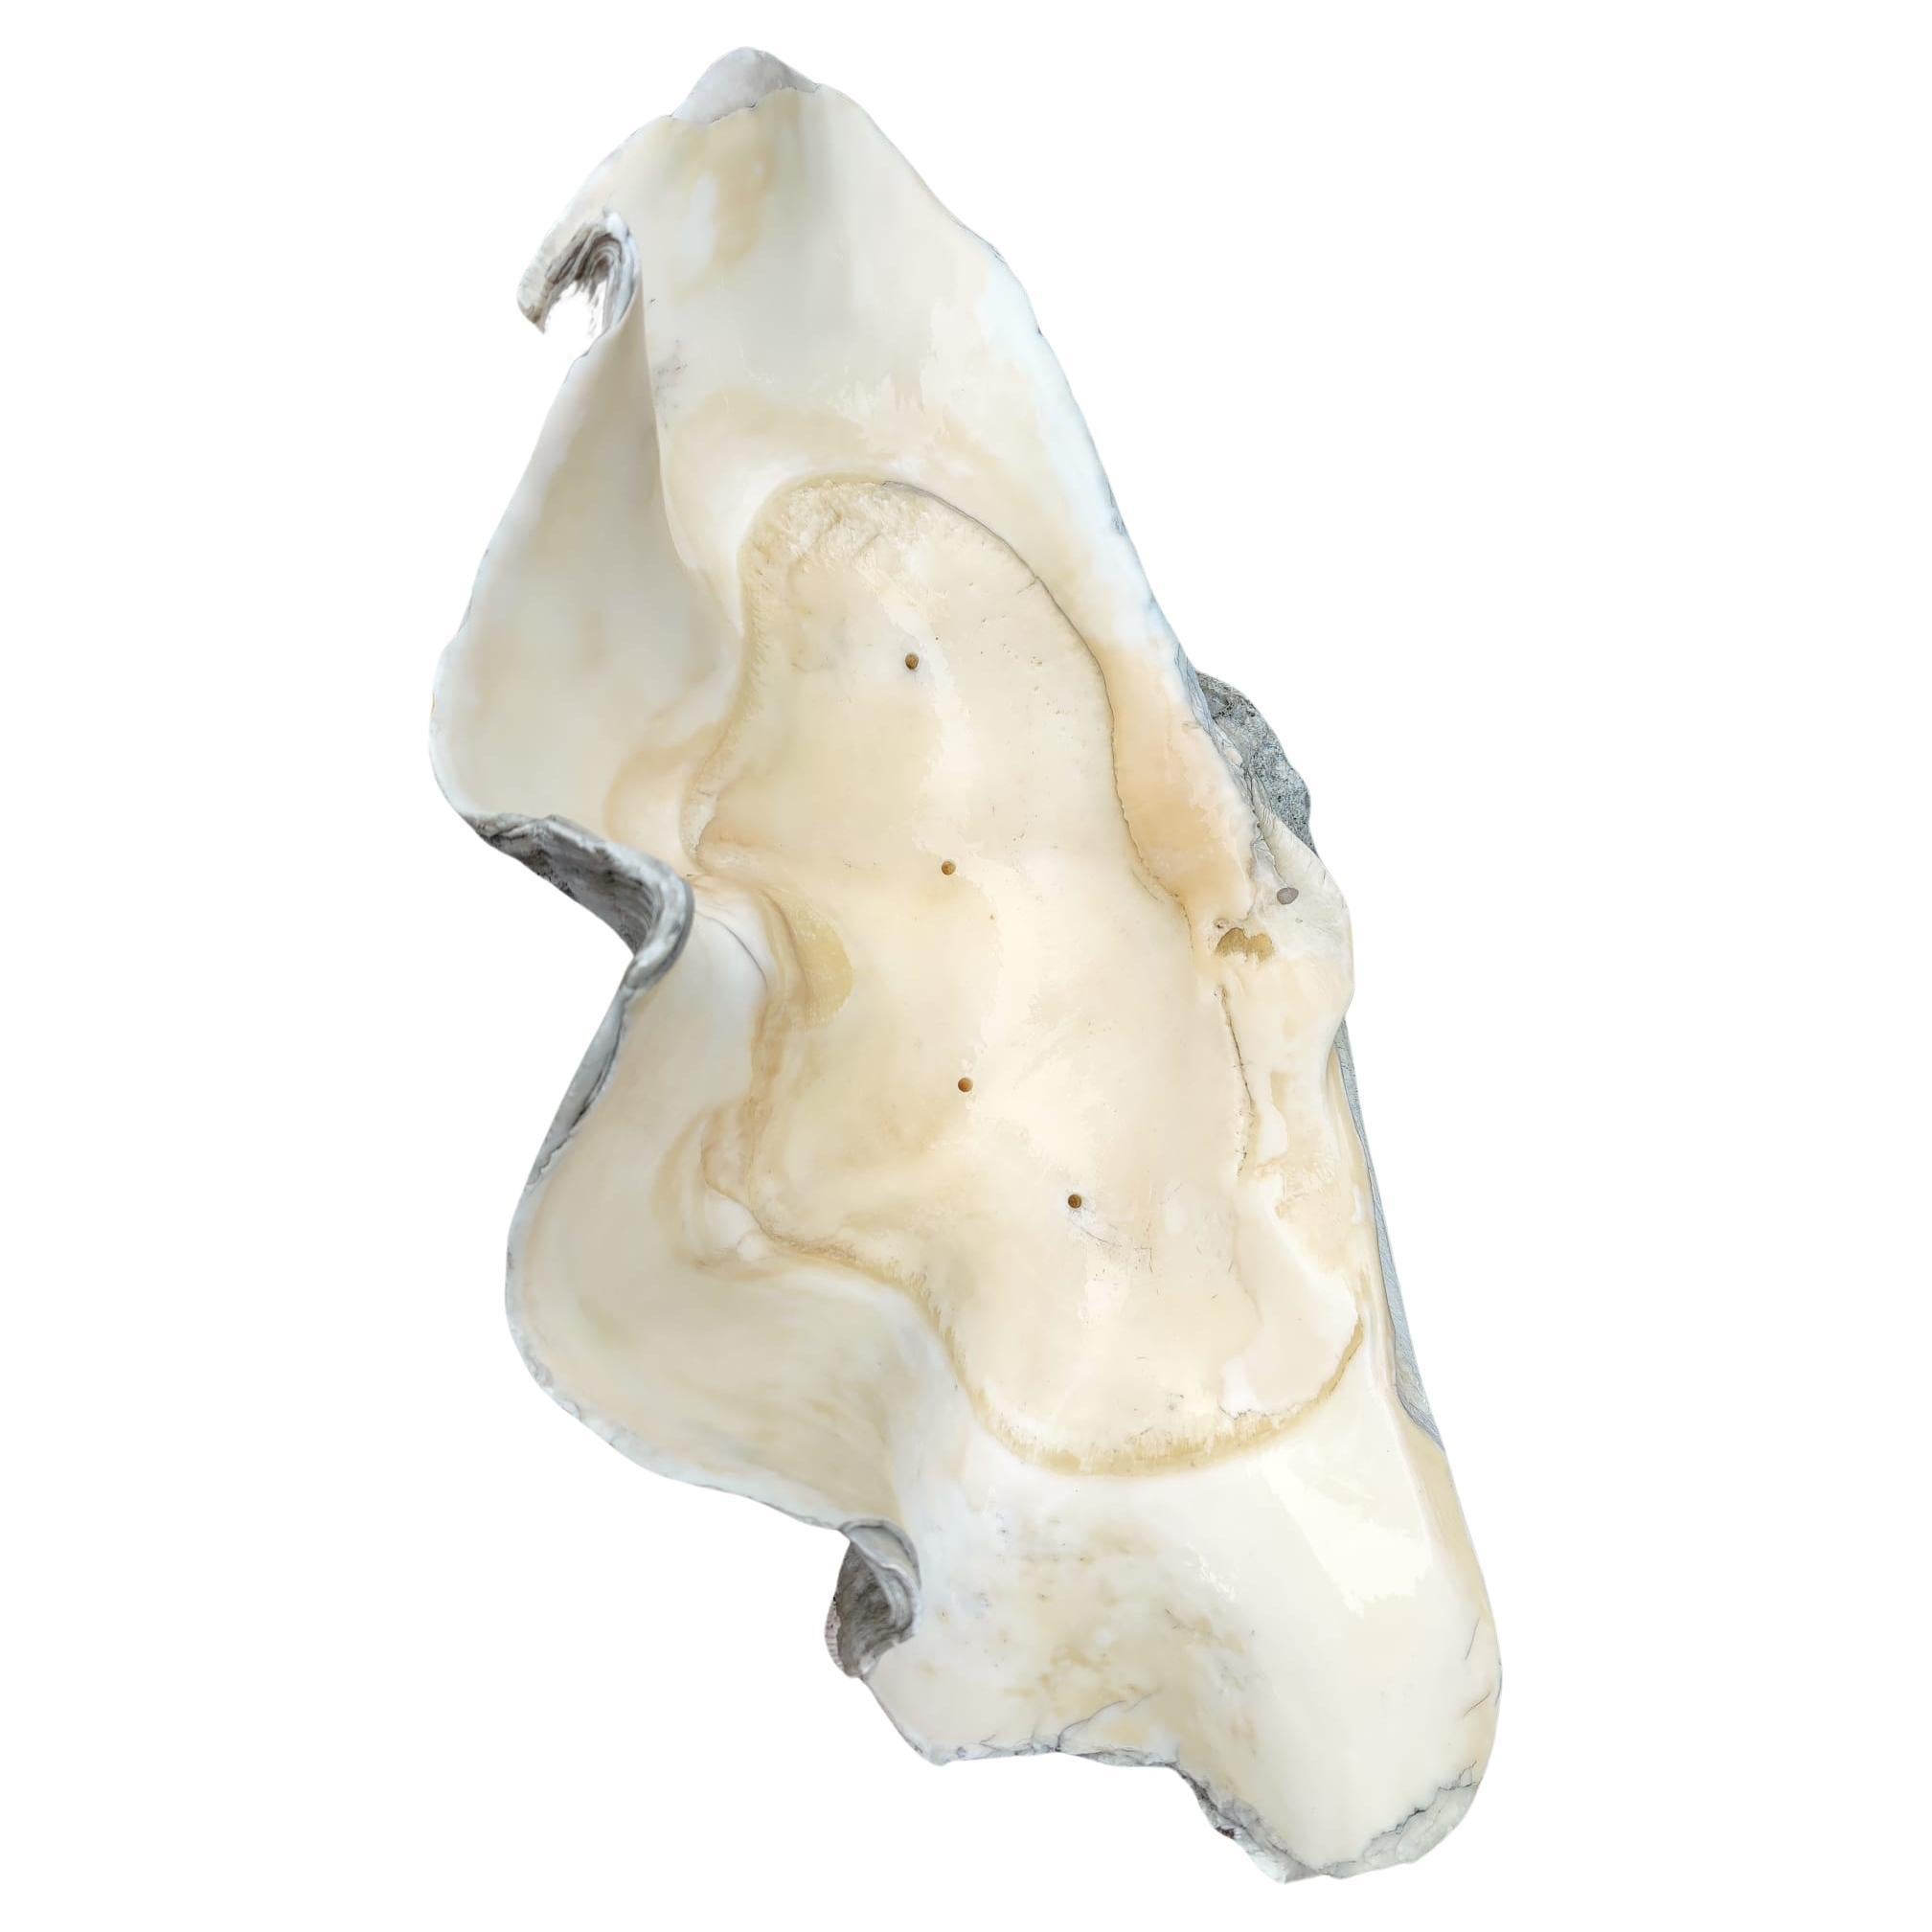 Wonderful example of a giant clam shell from the Indian Ocean. The bleached white color and high profile of the scallops make this a distinctive centerpiece or decoration. This specimen is truly unique and rare.
The shell is in good vintage